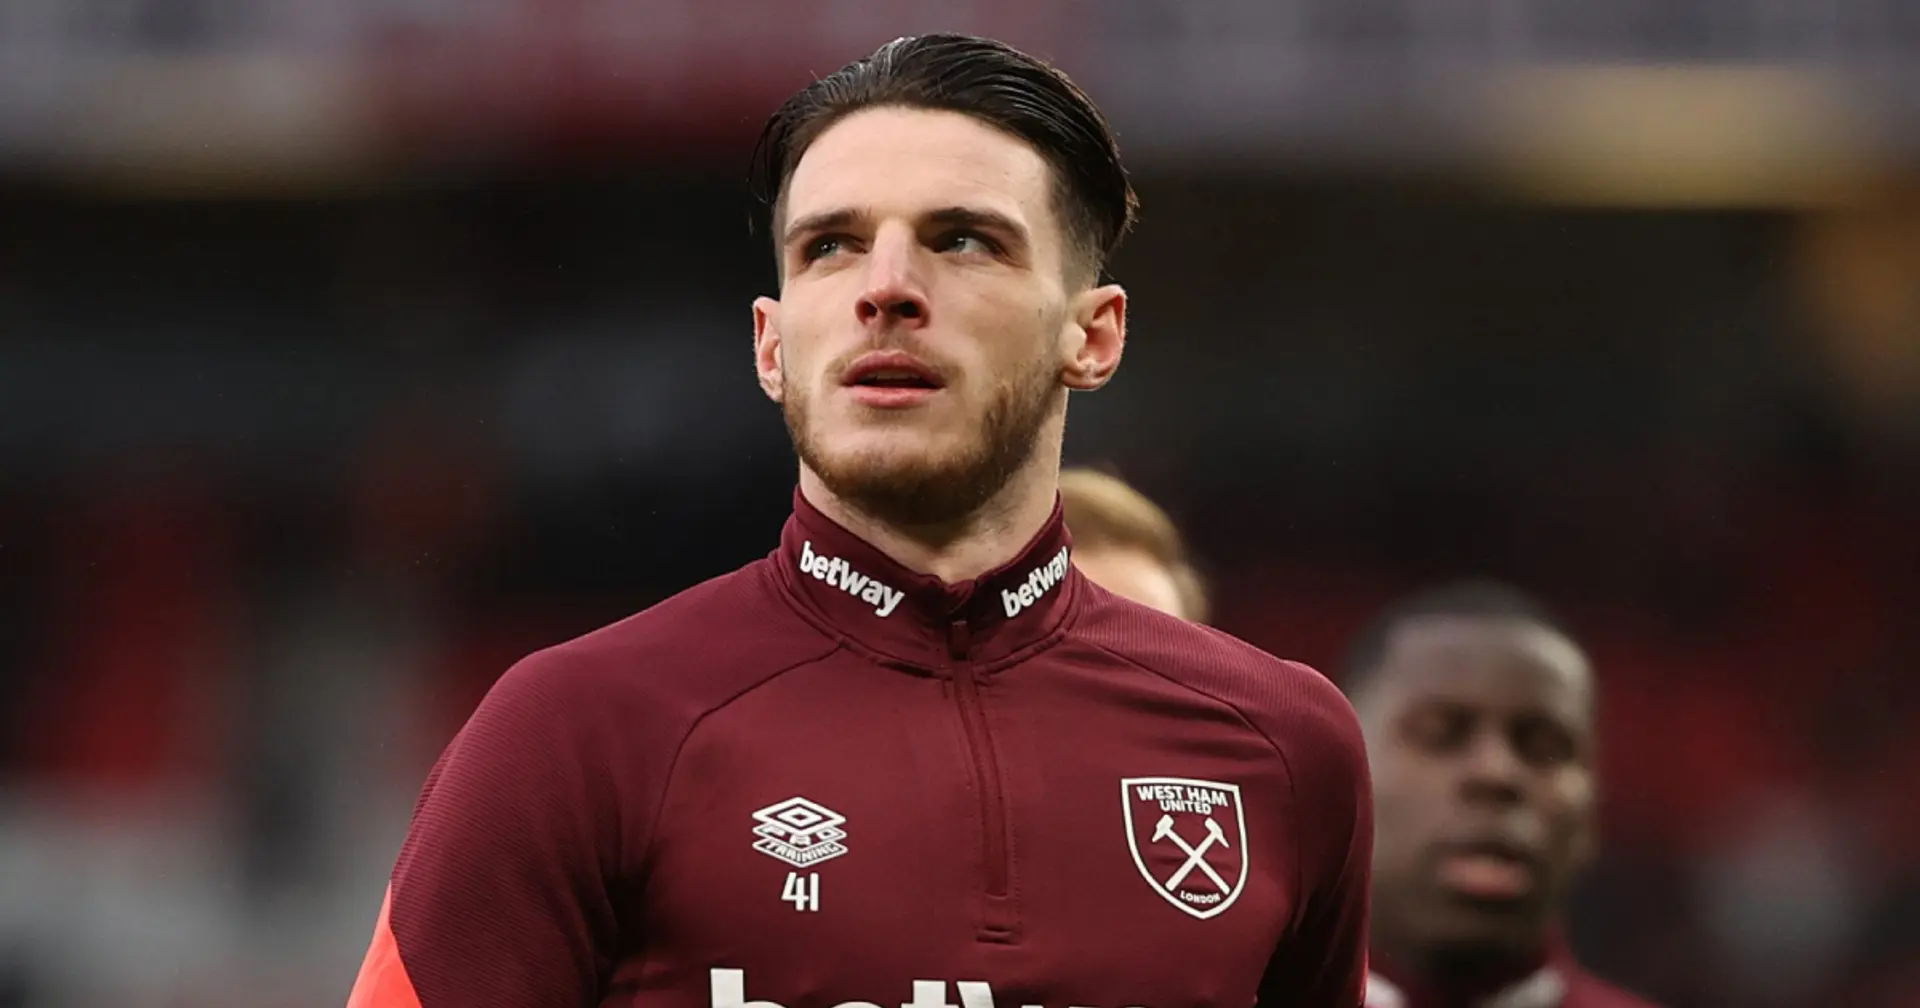 West Ham ready to listen to offers for Declan Rice in 2023 (reliability: 4 stars)